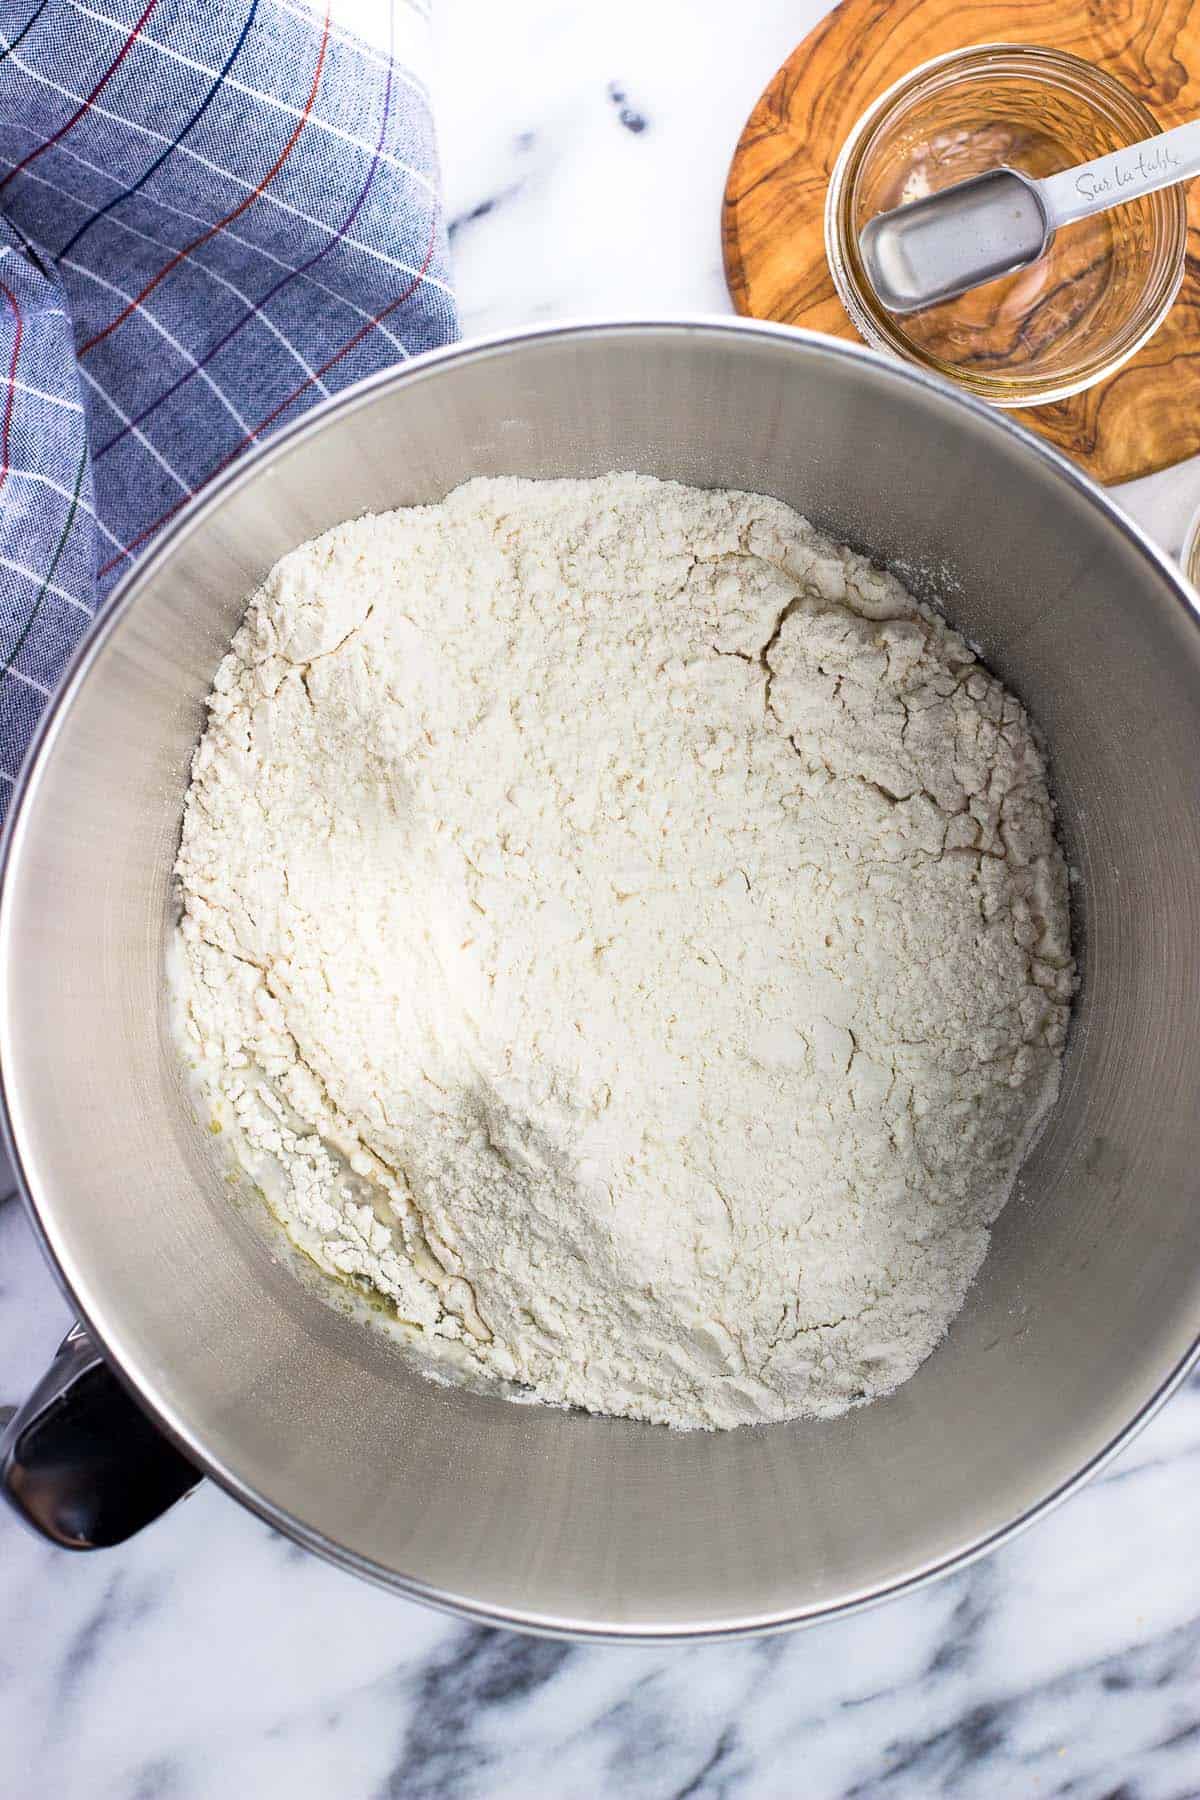 Flour, olive oil, salt, and sugar added to the water and yeast in a bowl.